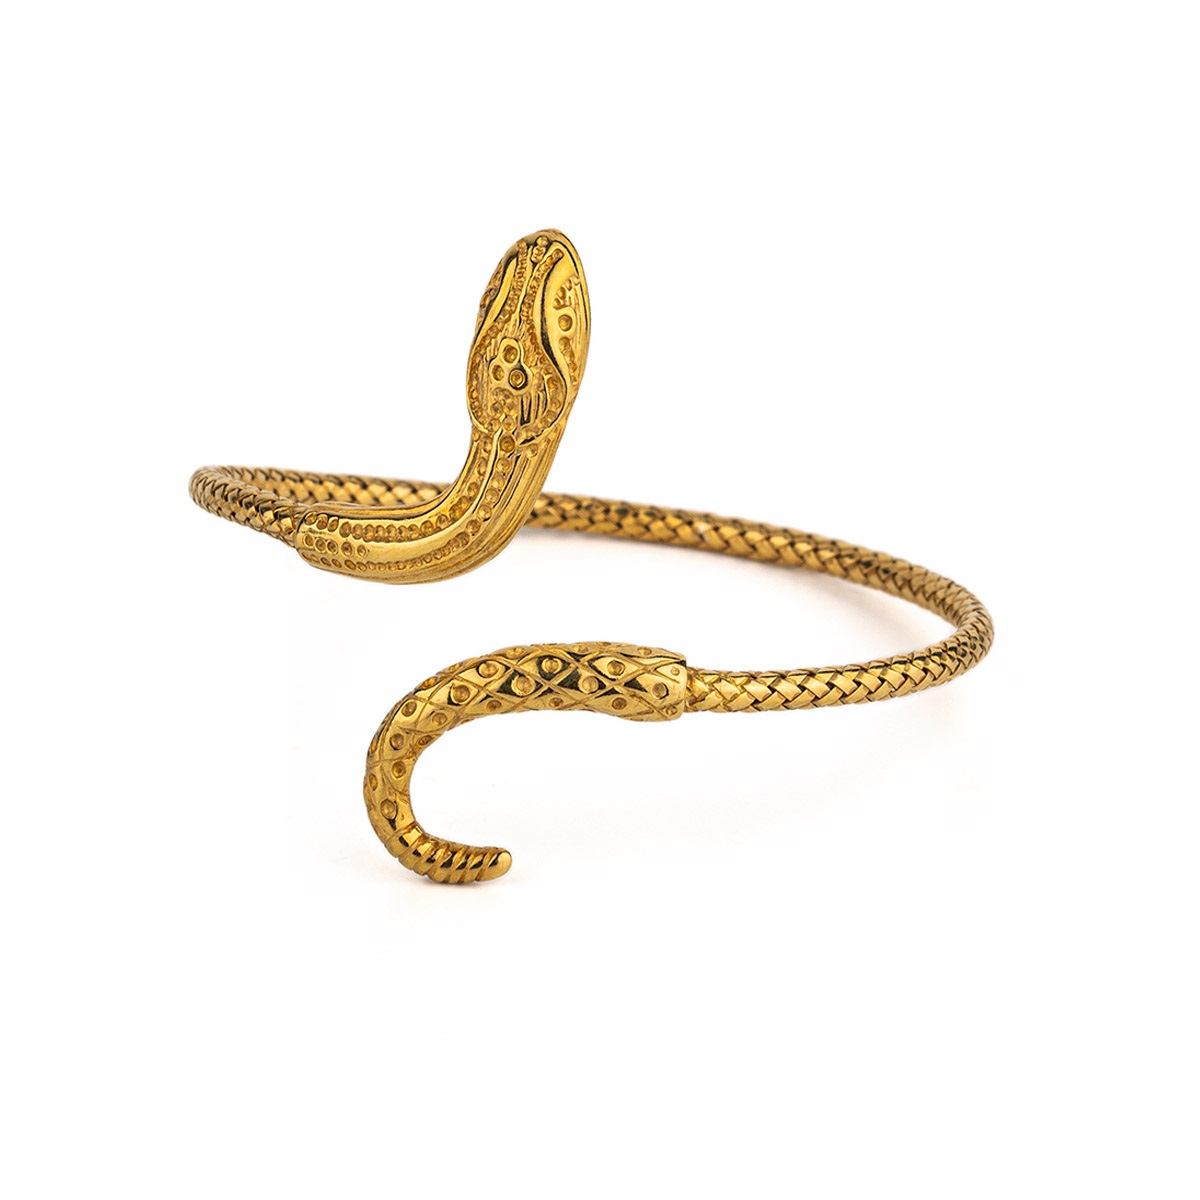 Snake Cuff Bracelet – 925 Sterling Silver and Gold Plated - GREEK ROOTS